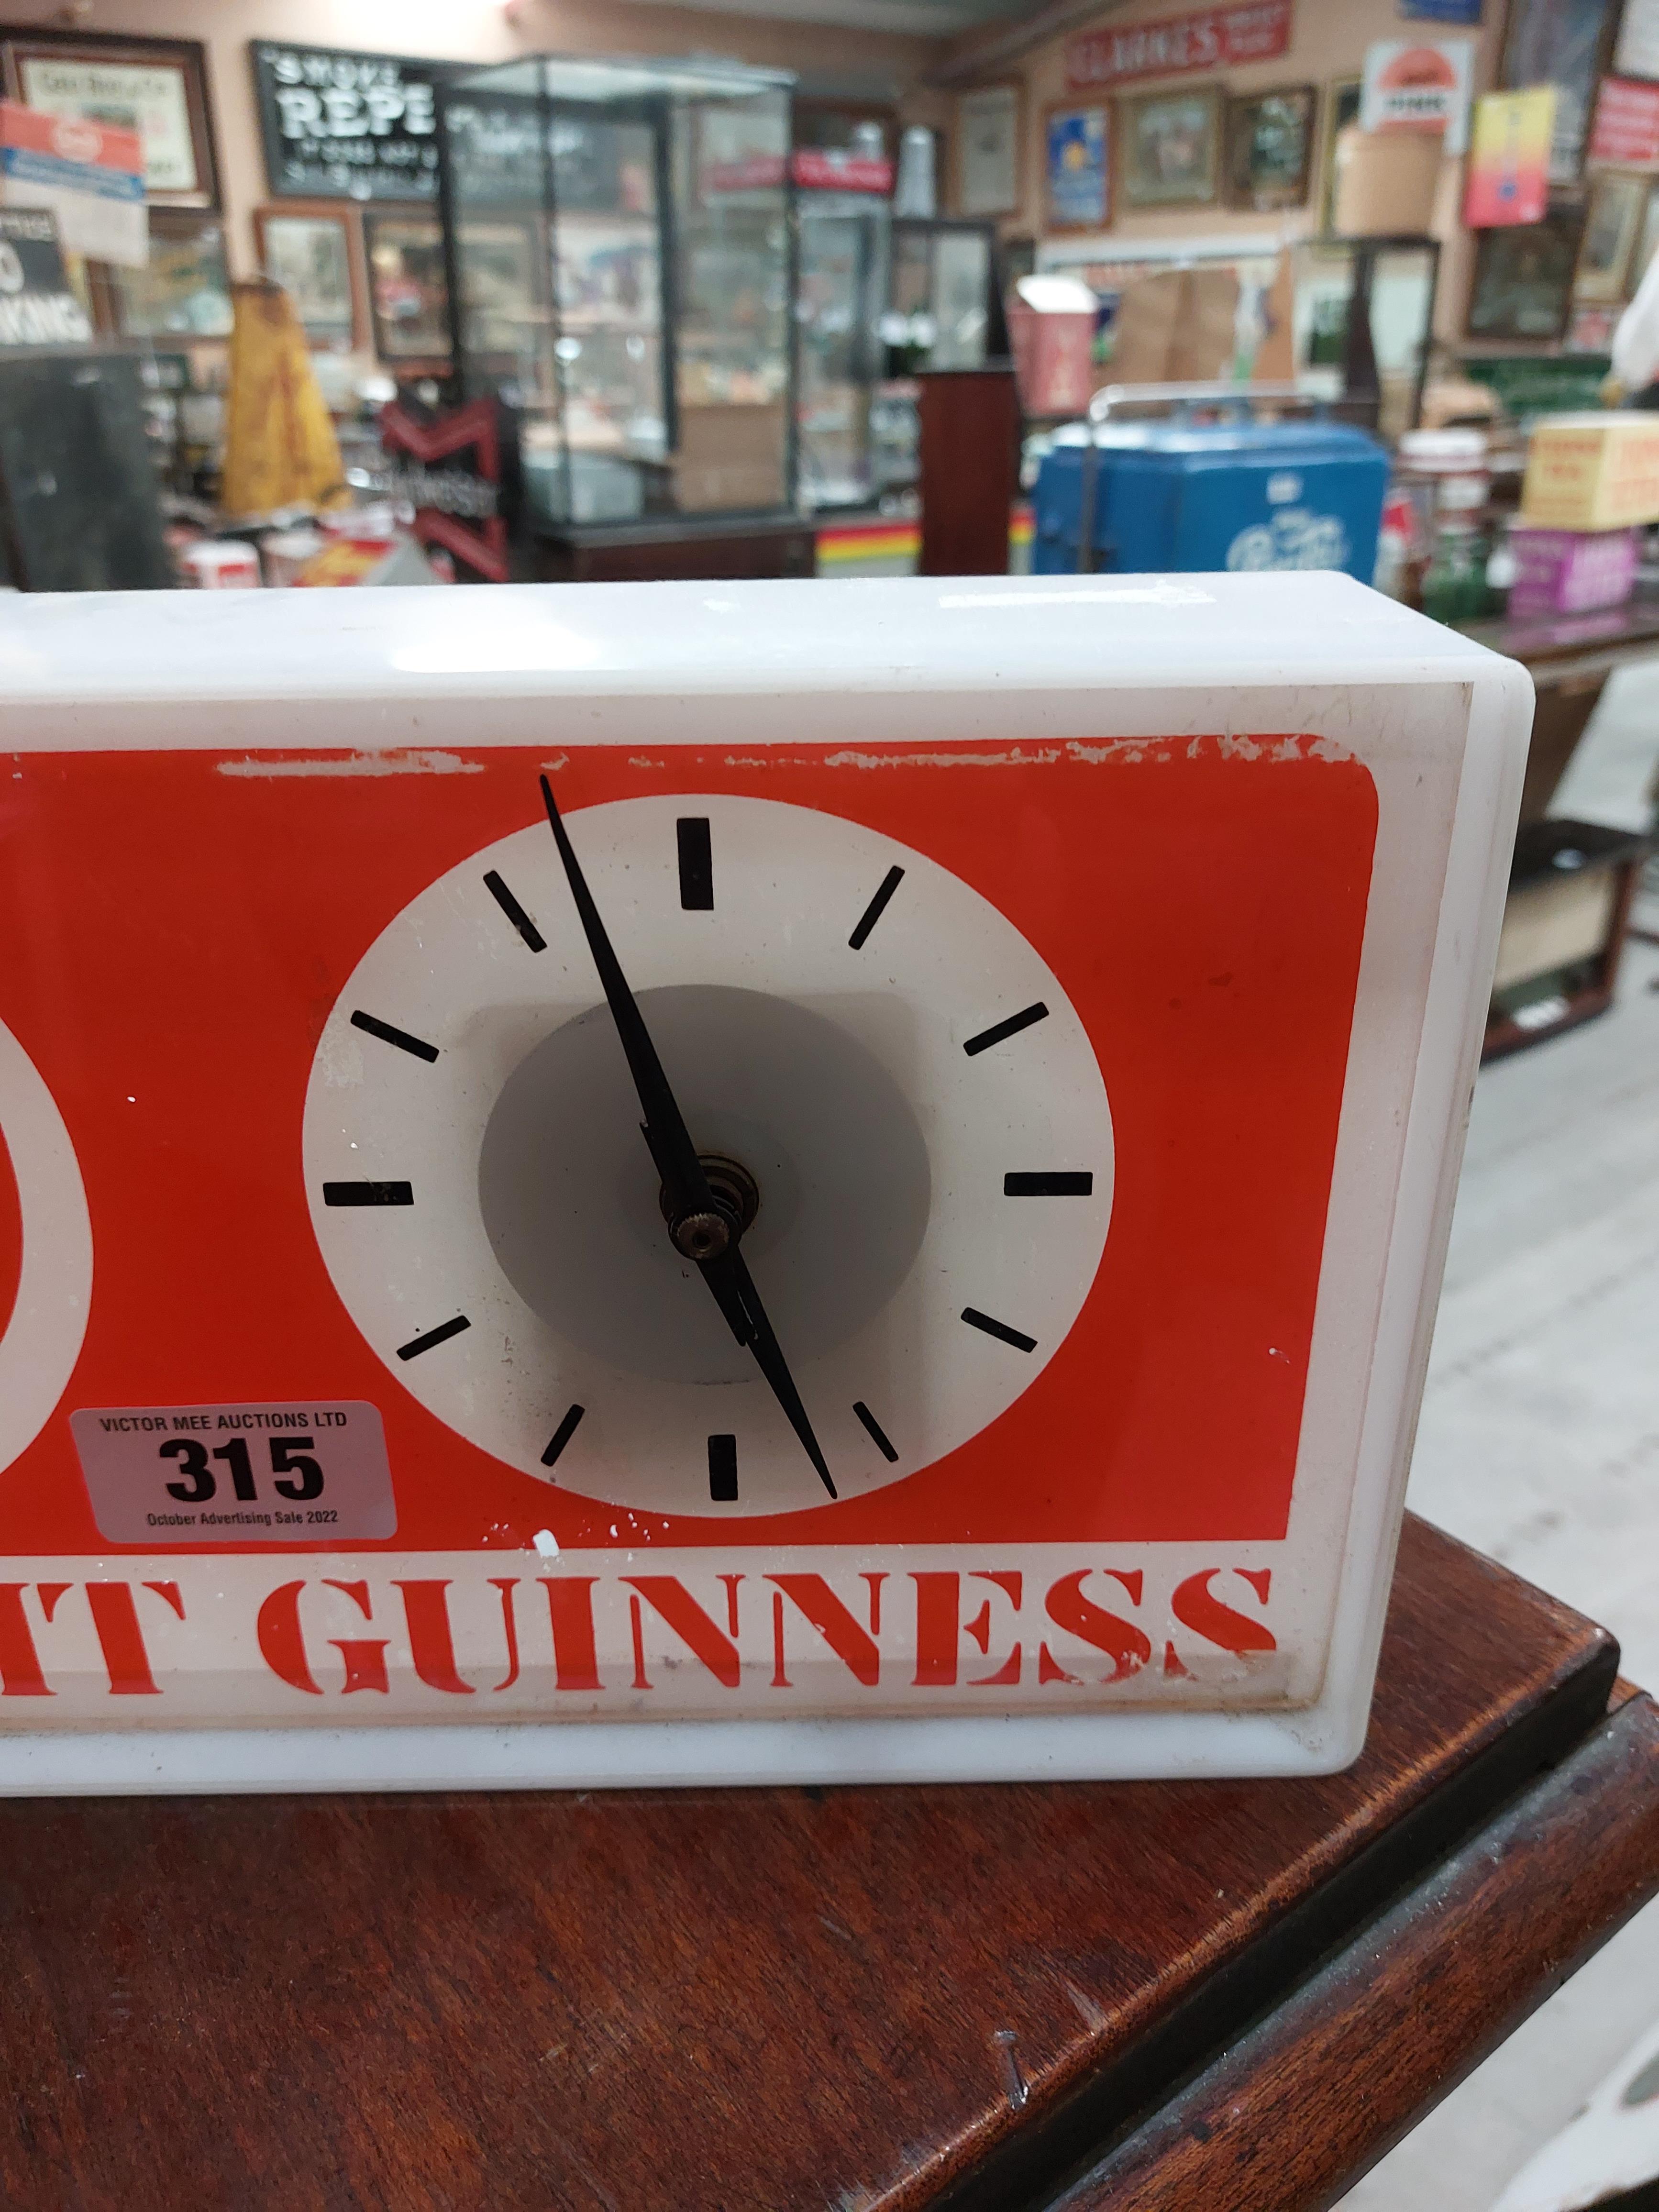 Perspex Draught Guinness light up advertising clock { 18 cm H x 36 cm W x 7 cm D}. - Image 3 of 3